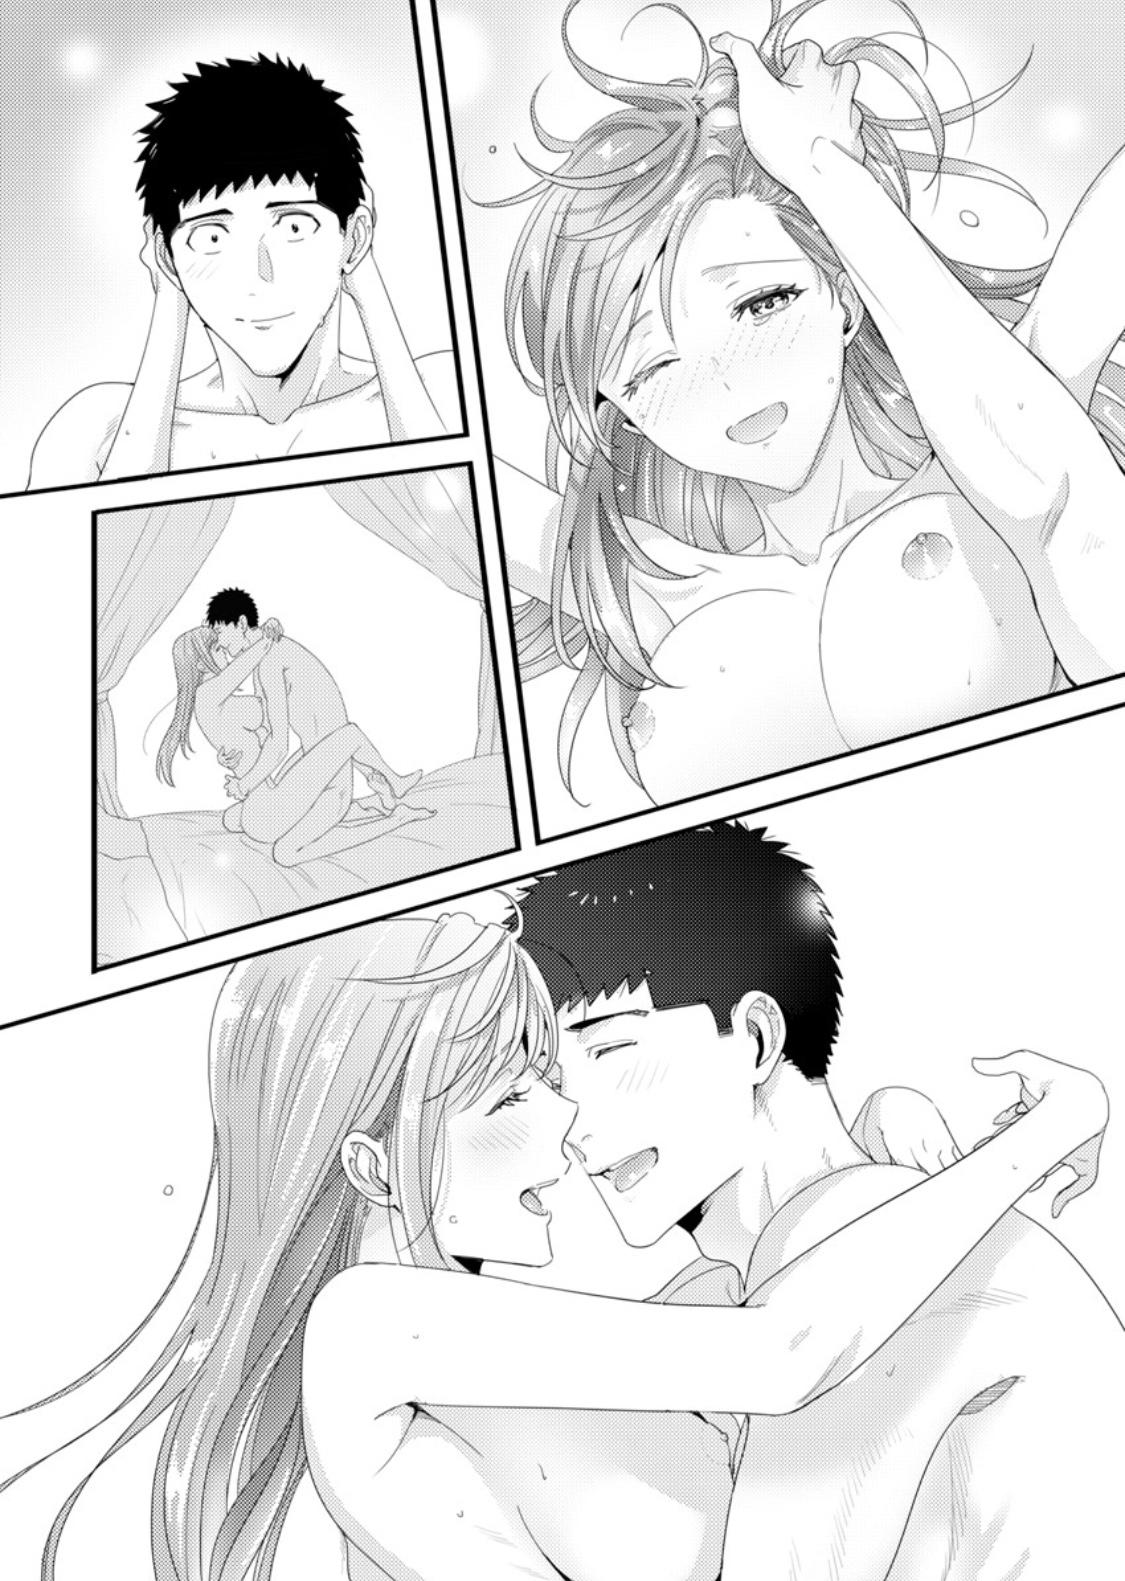 Please Let Me Hold You Futaba-San! Ch. 1-4 98